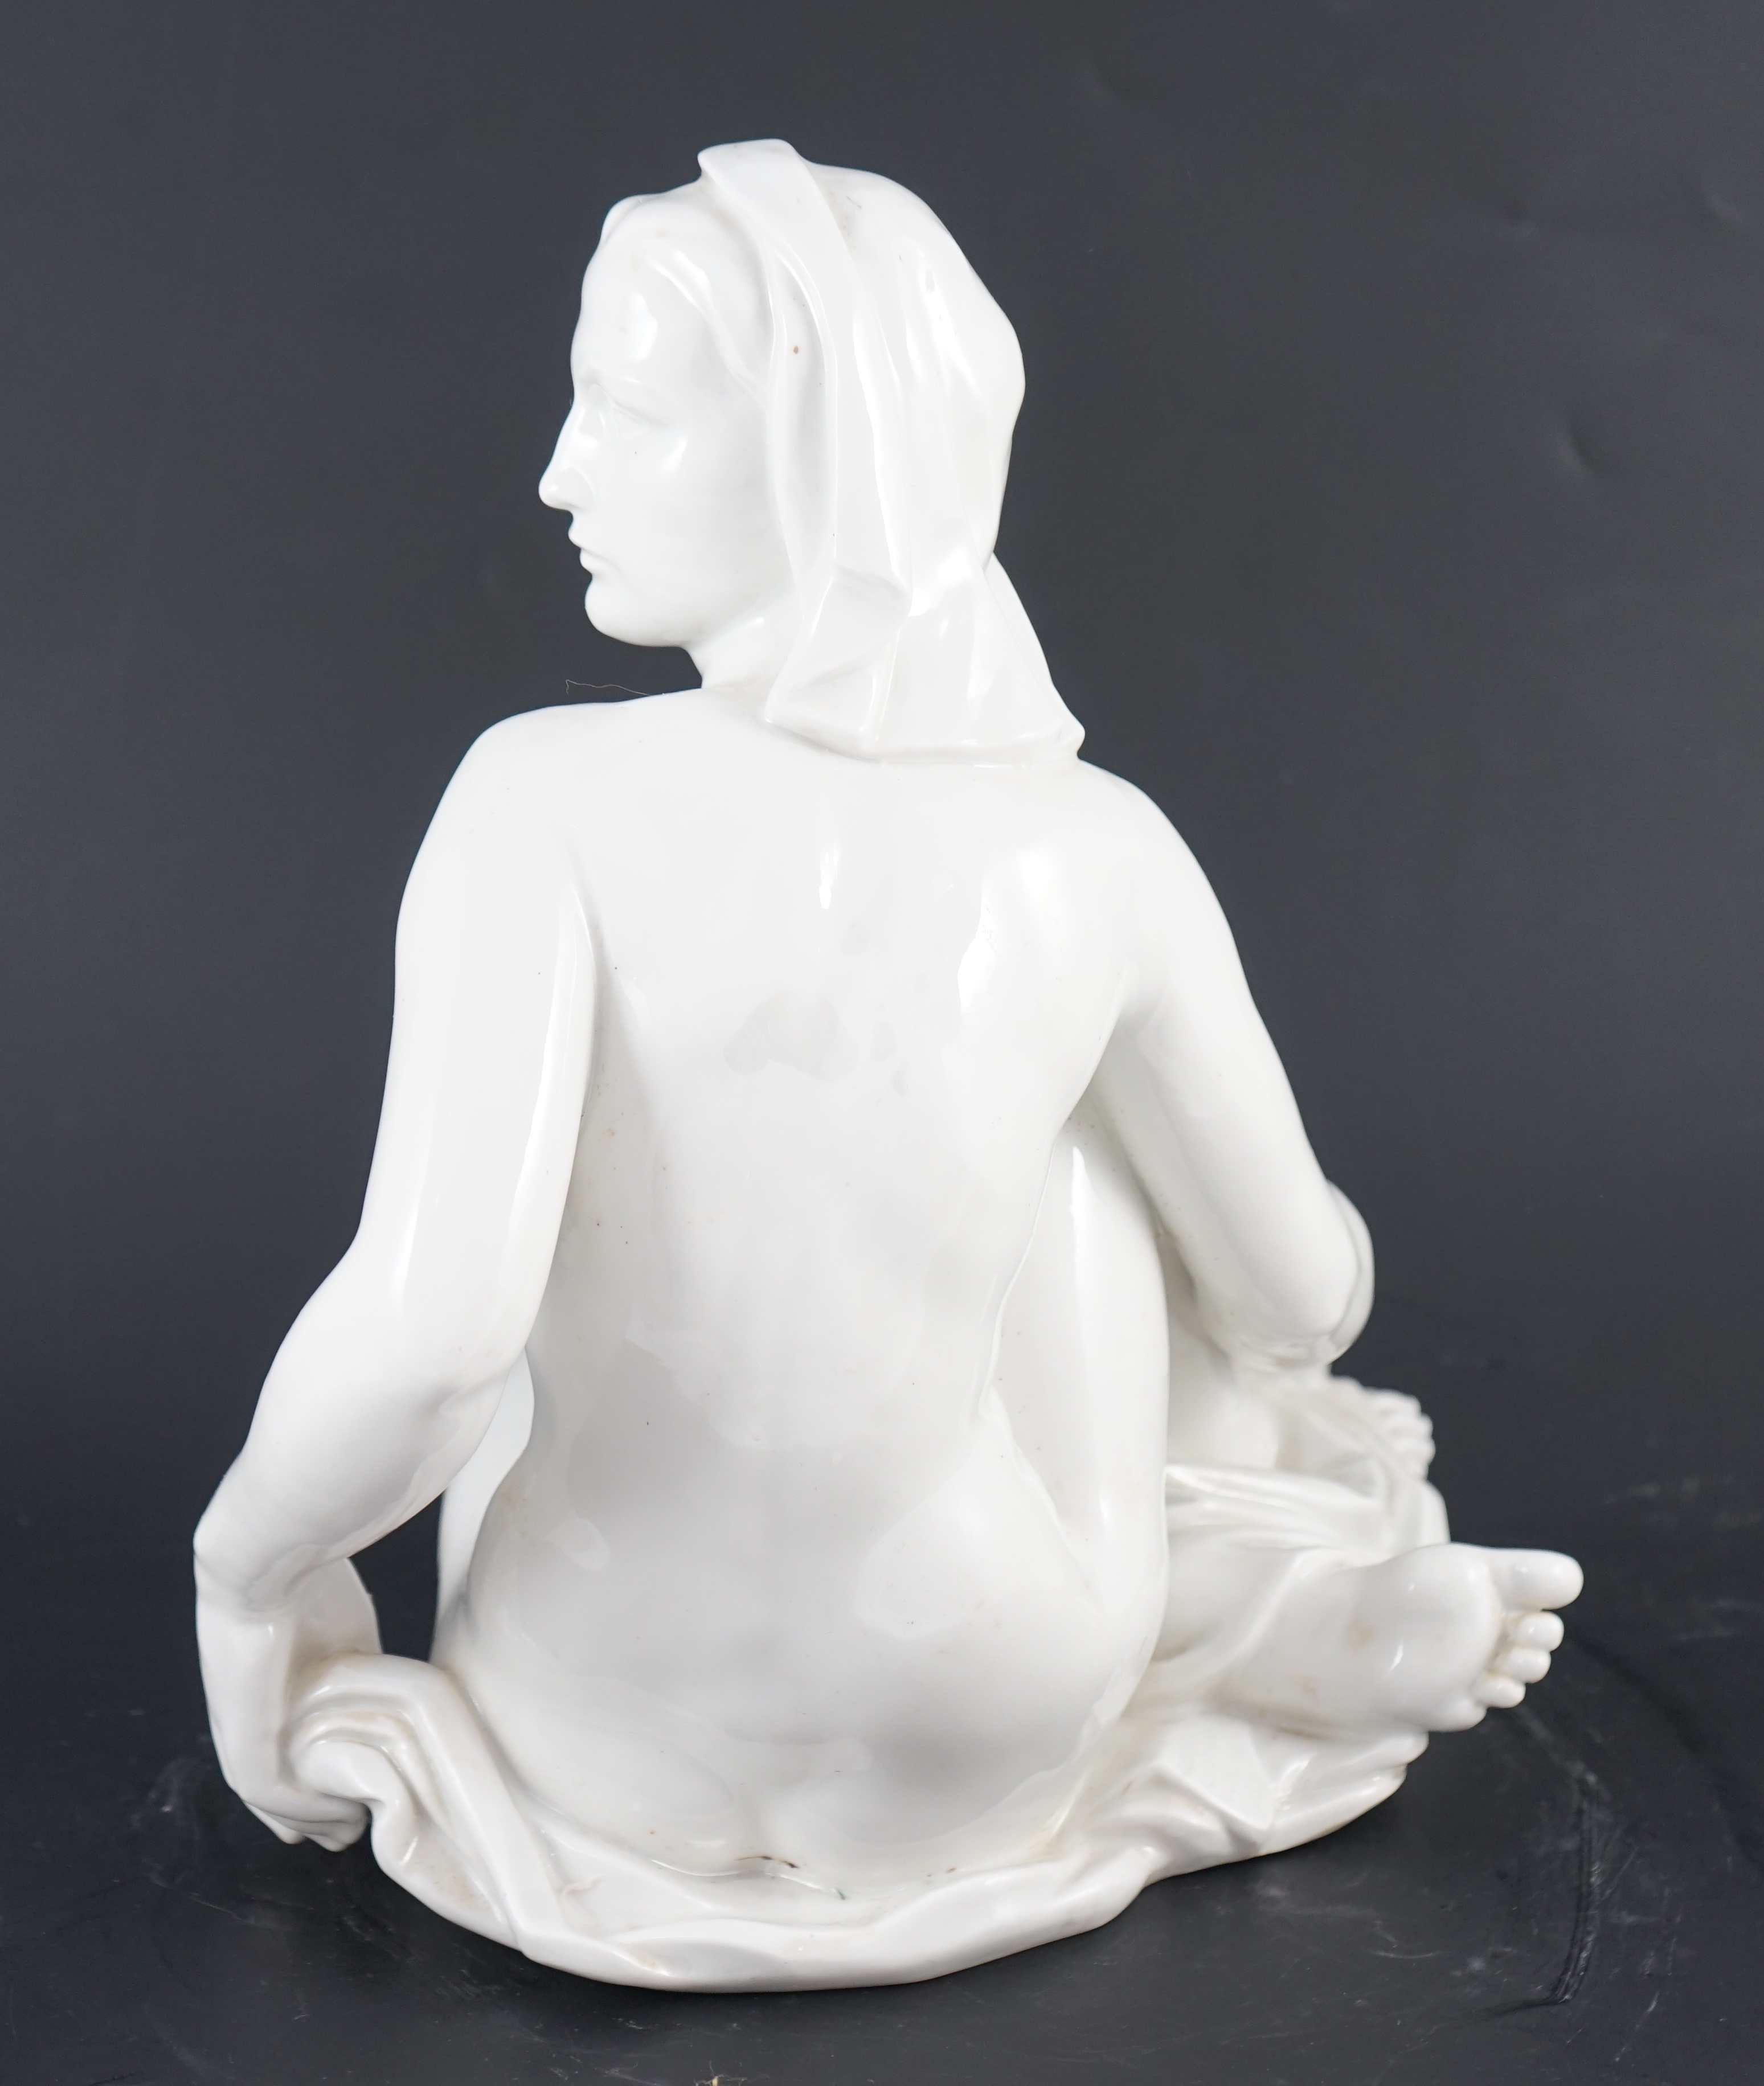 Robert Ullmann (1903-1966) for Meissen, a white glazed porcelain figure of a seated female nude, 31.5cm high